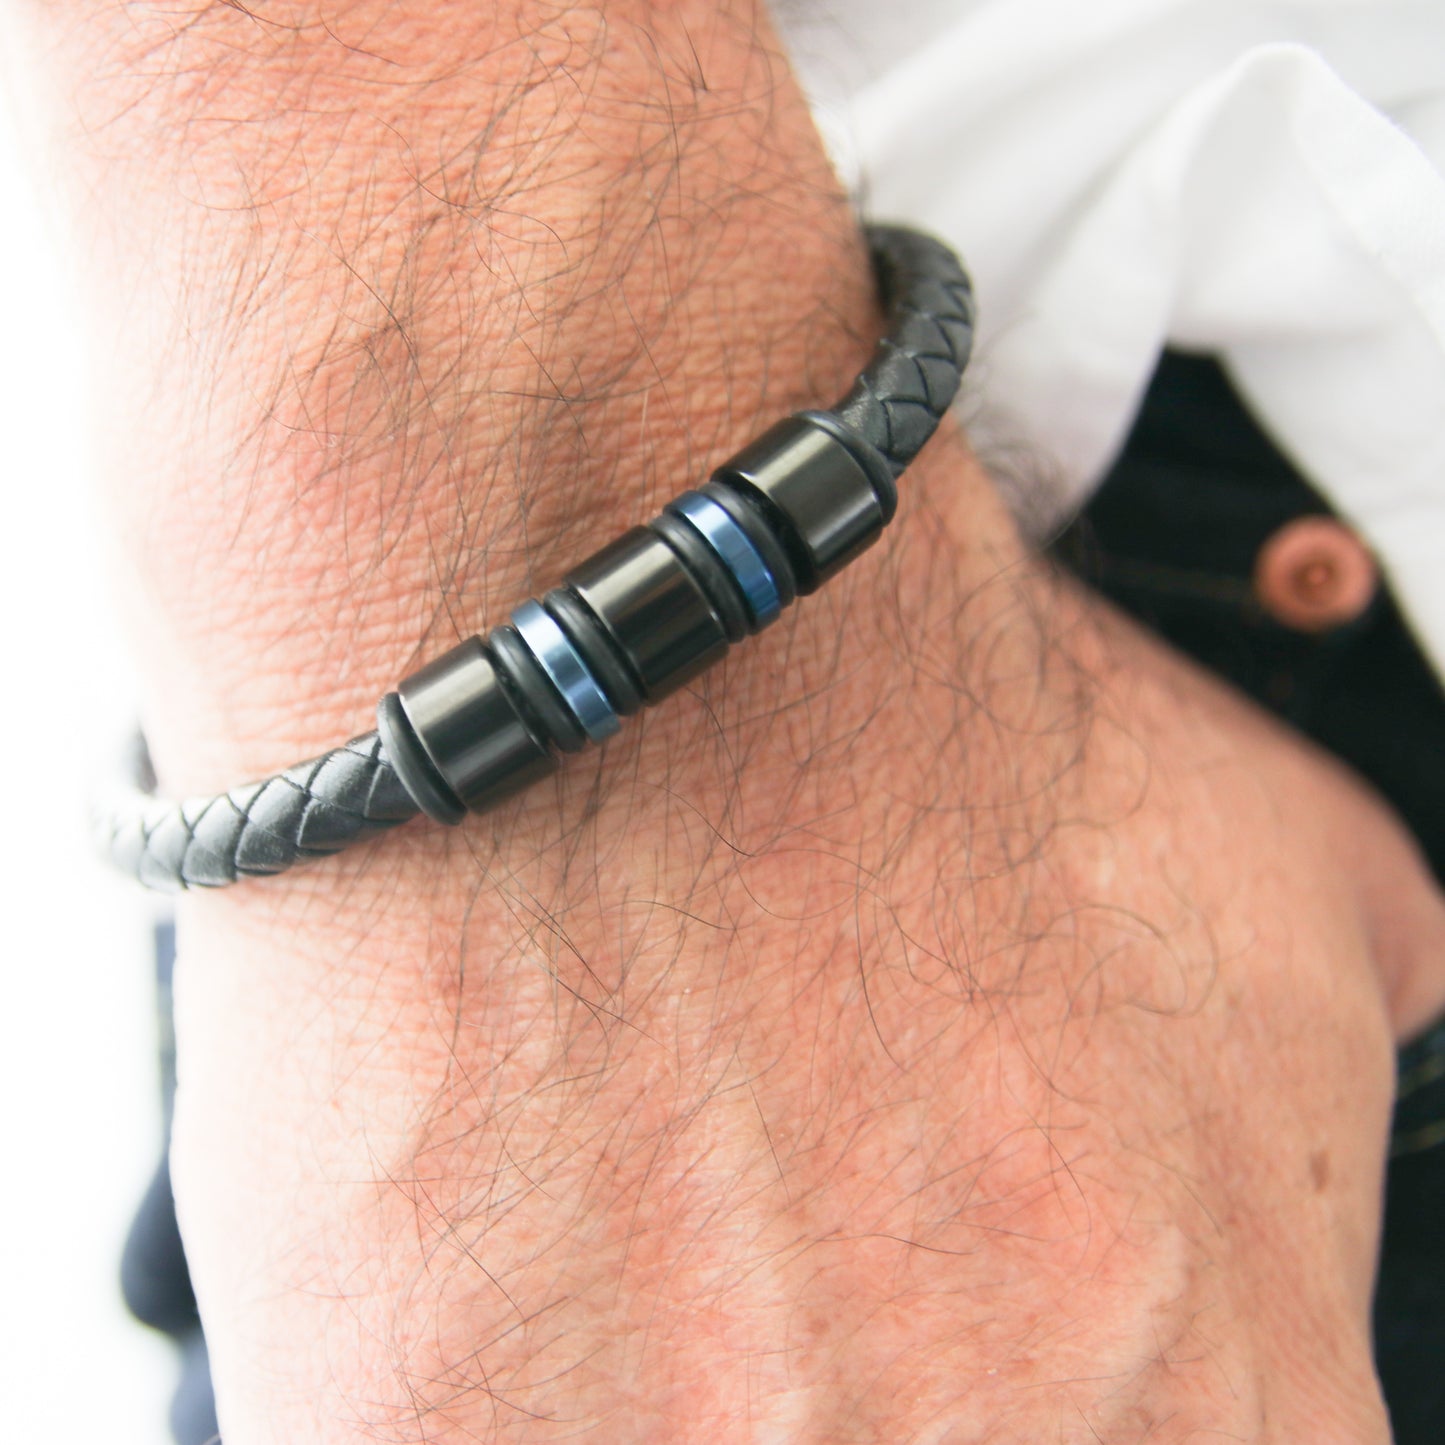 Men's Blue-Accented Black Leather Stainless Steel Bracelet